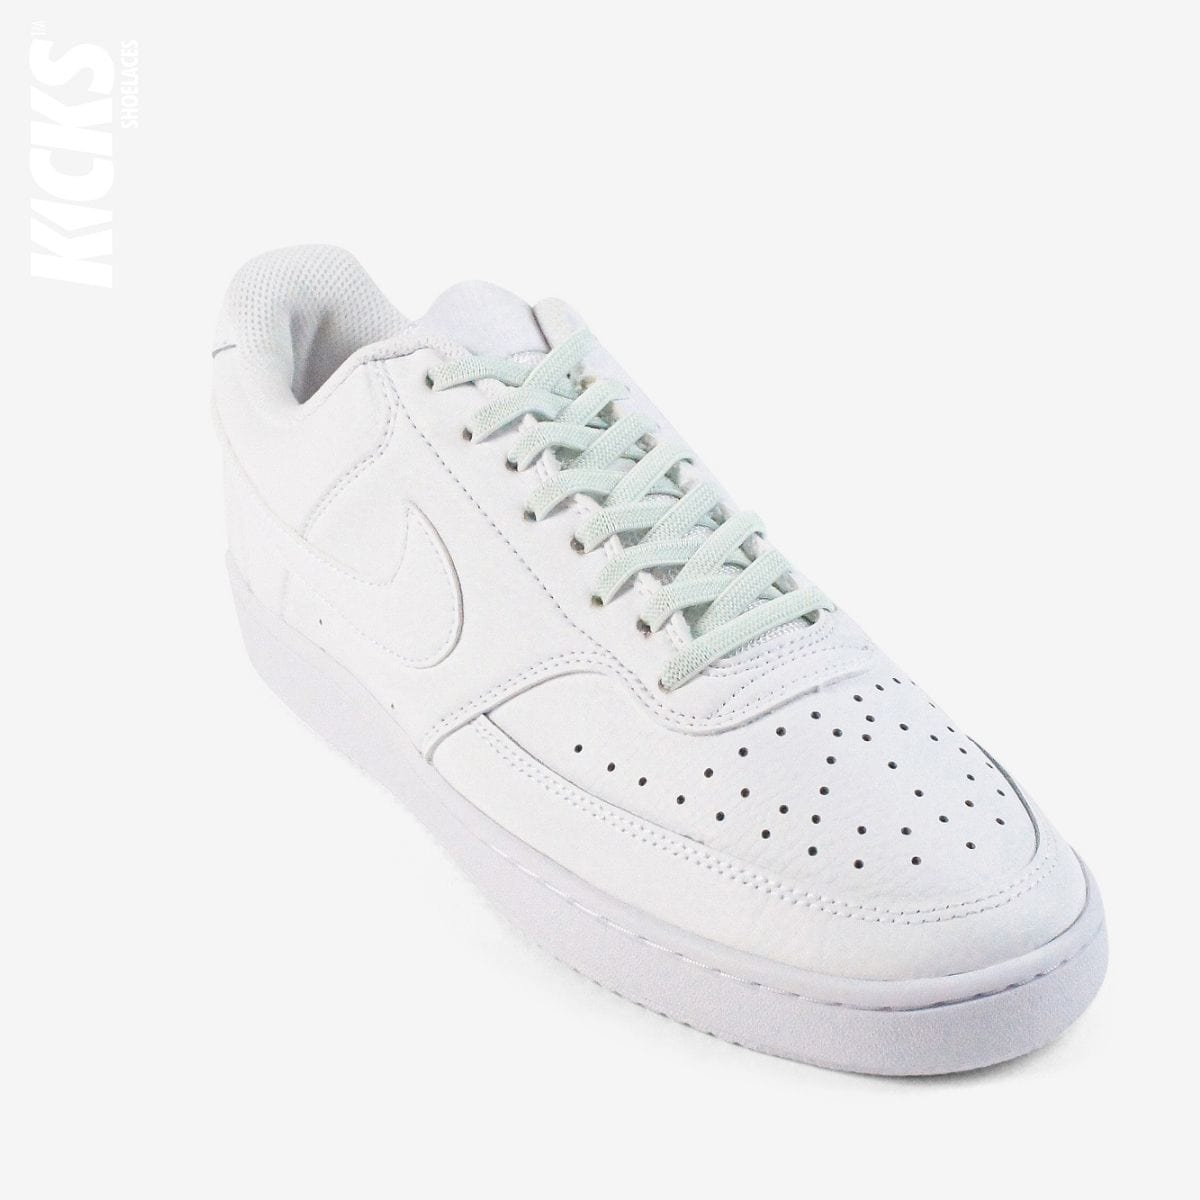 no-tie-shoelaces-with-pastel-green-laces-on-nike-white-sneakers-by-kicks-shoelaces